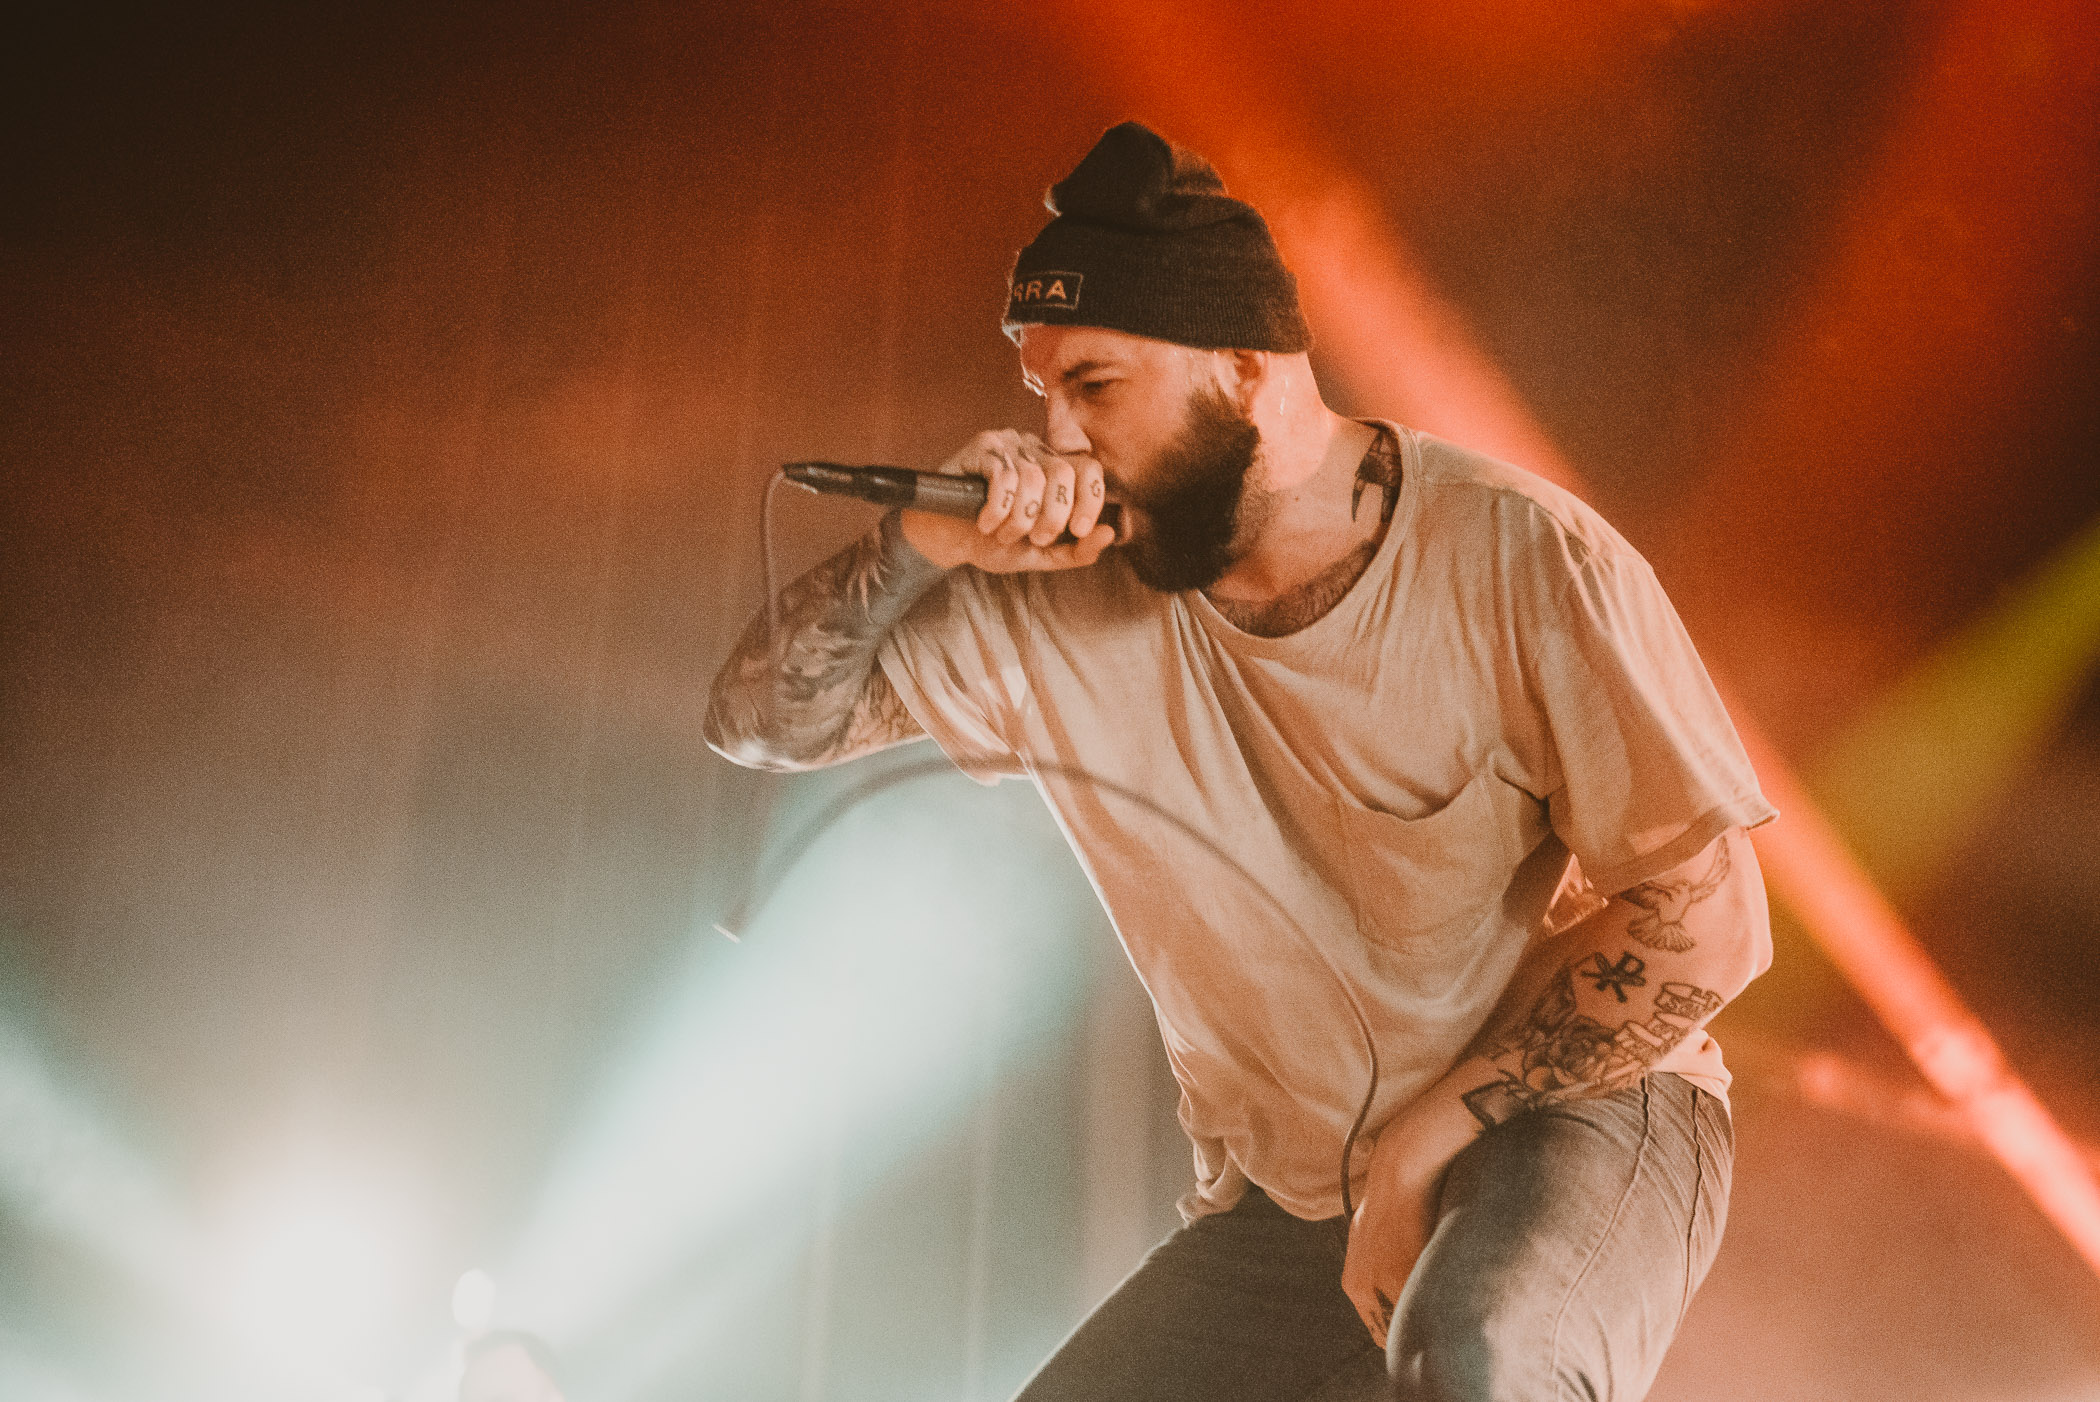 1_August_Burns_Red-Vogue_Theatre-Timothy_Nguyen-20180119 (7 of 15).jpg